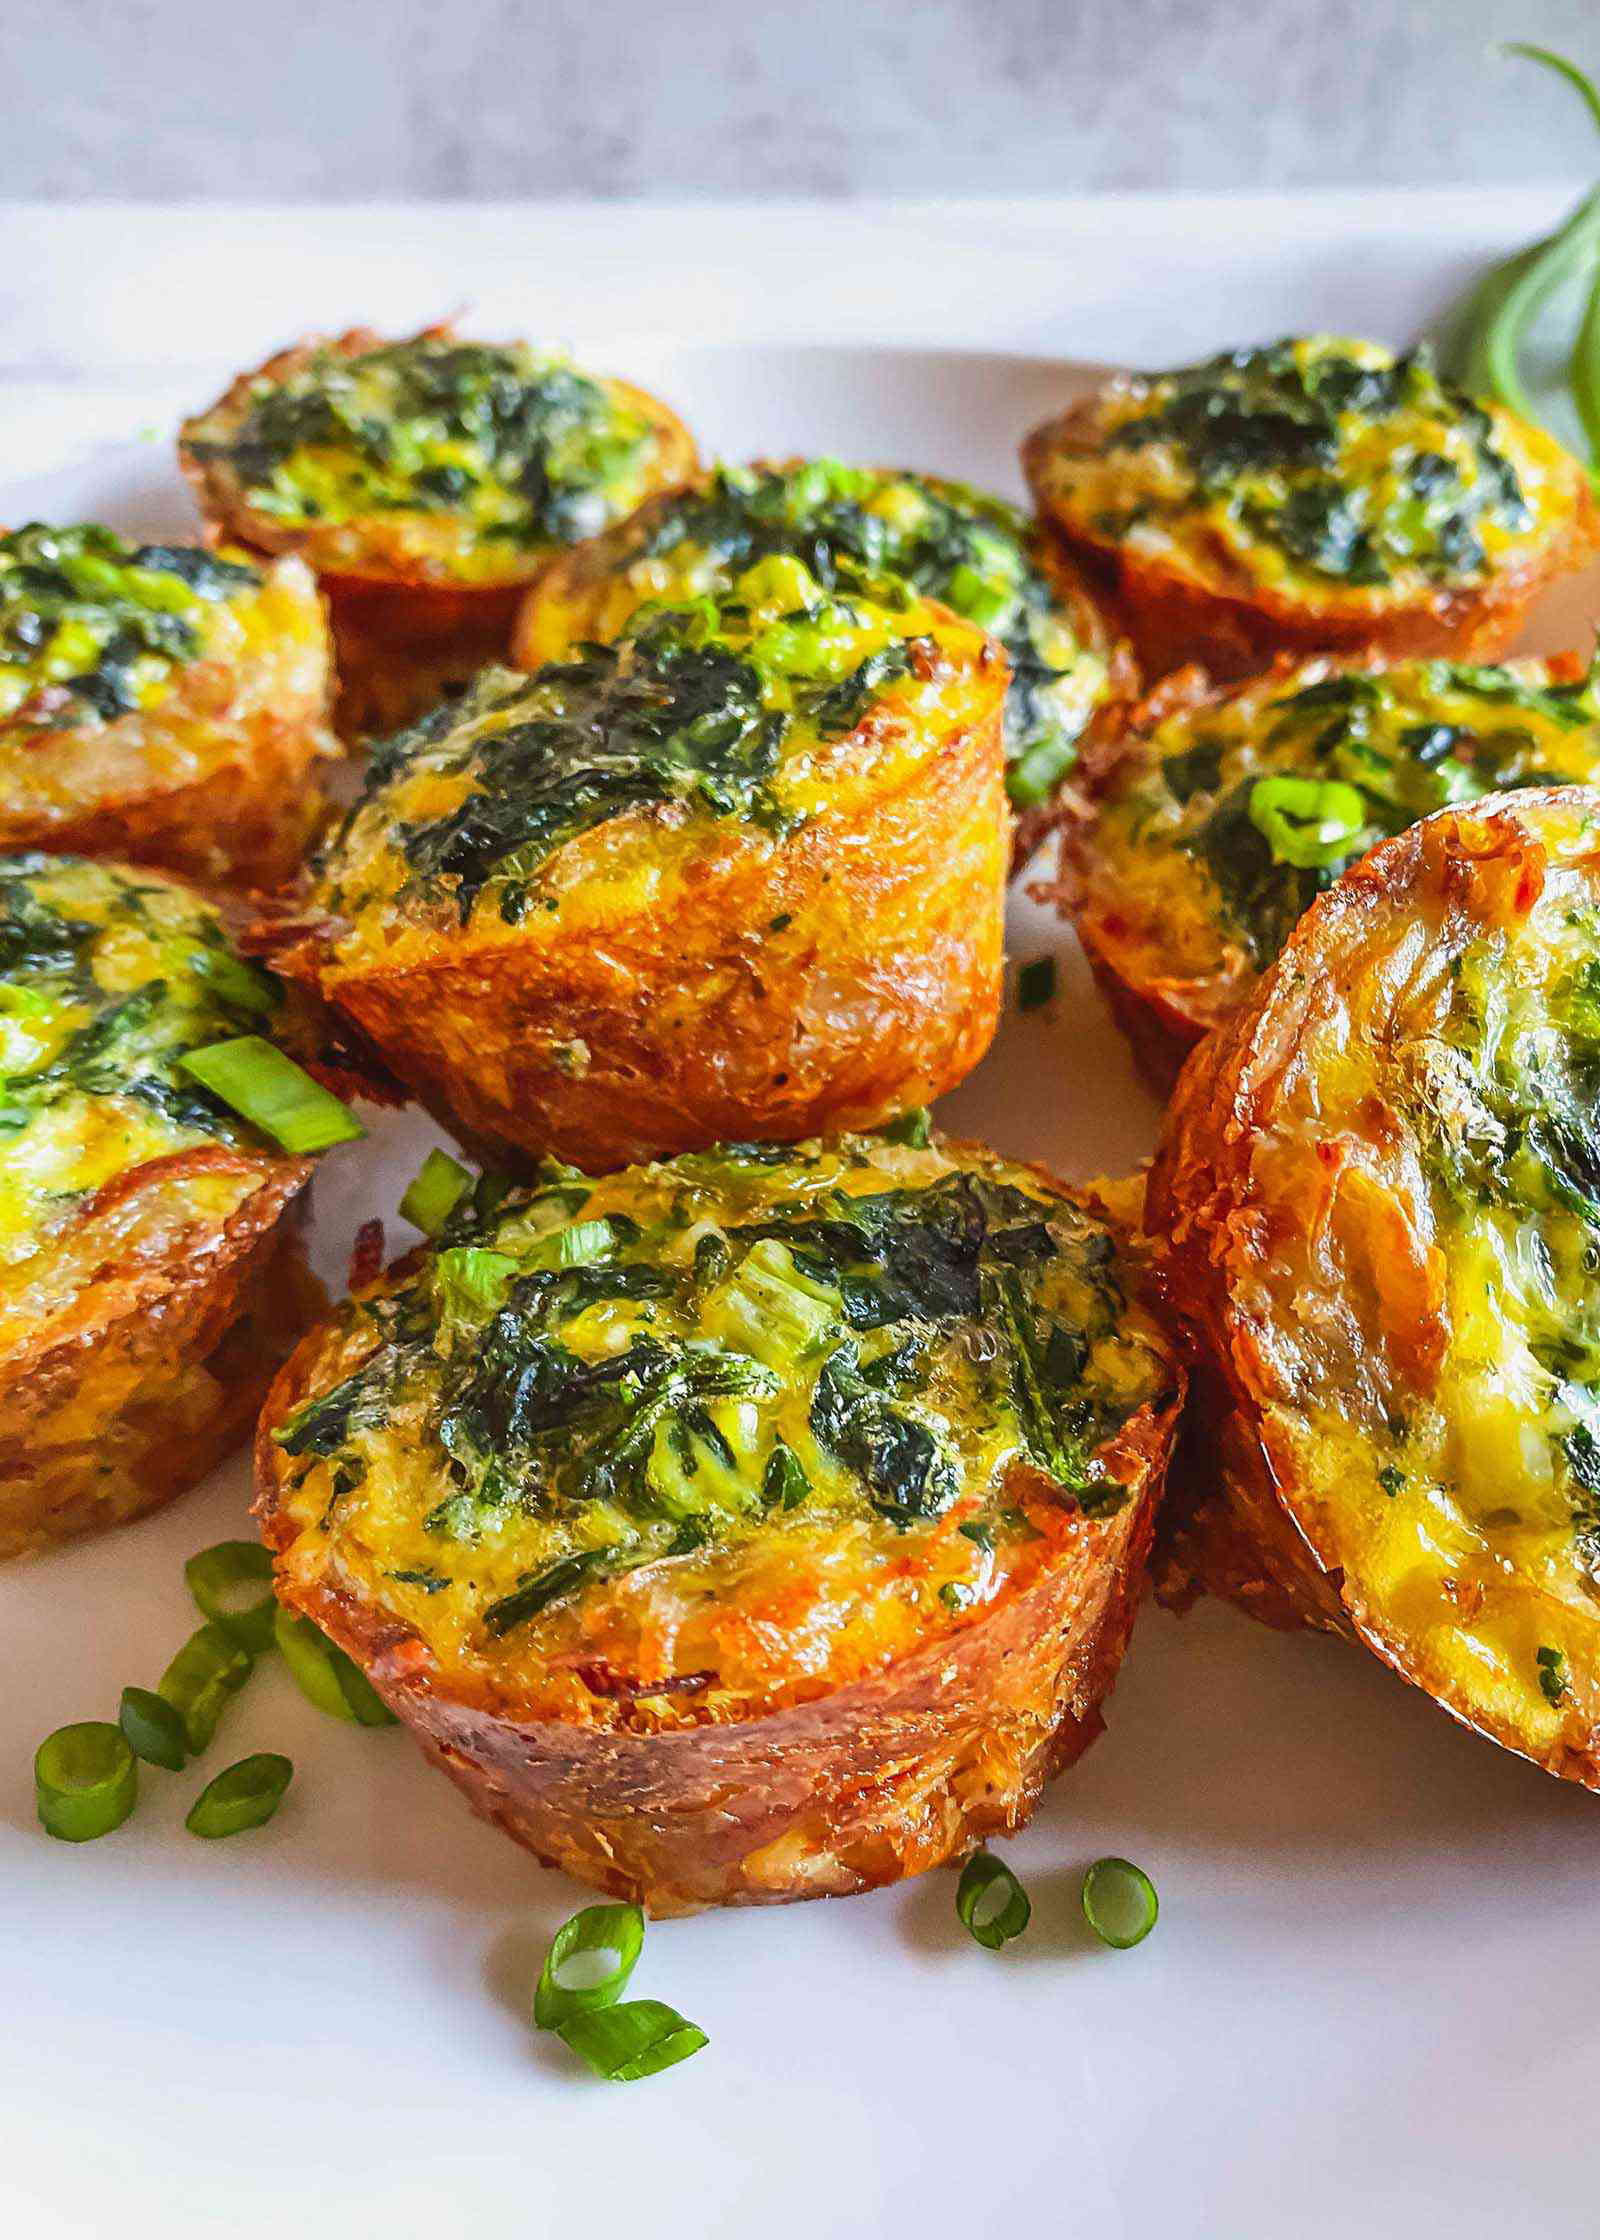 25 Savory Breakfasts Ideas to Power Up Your Mornings